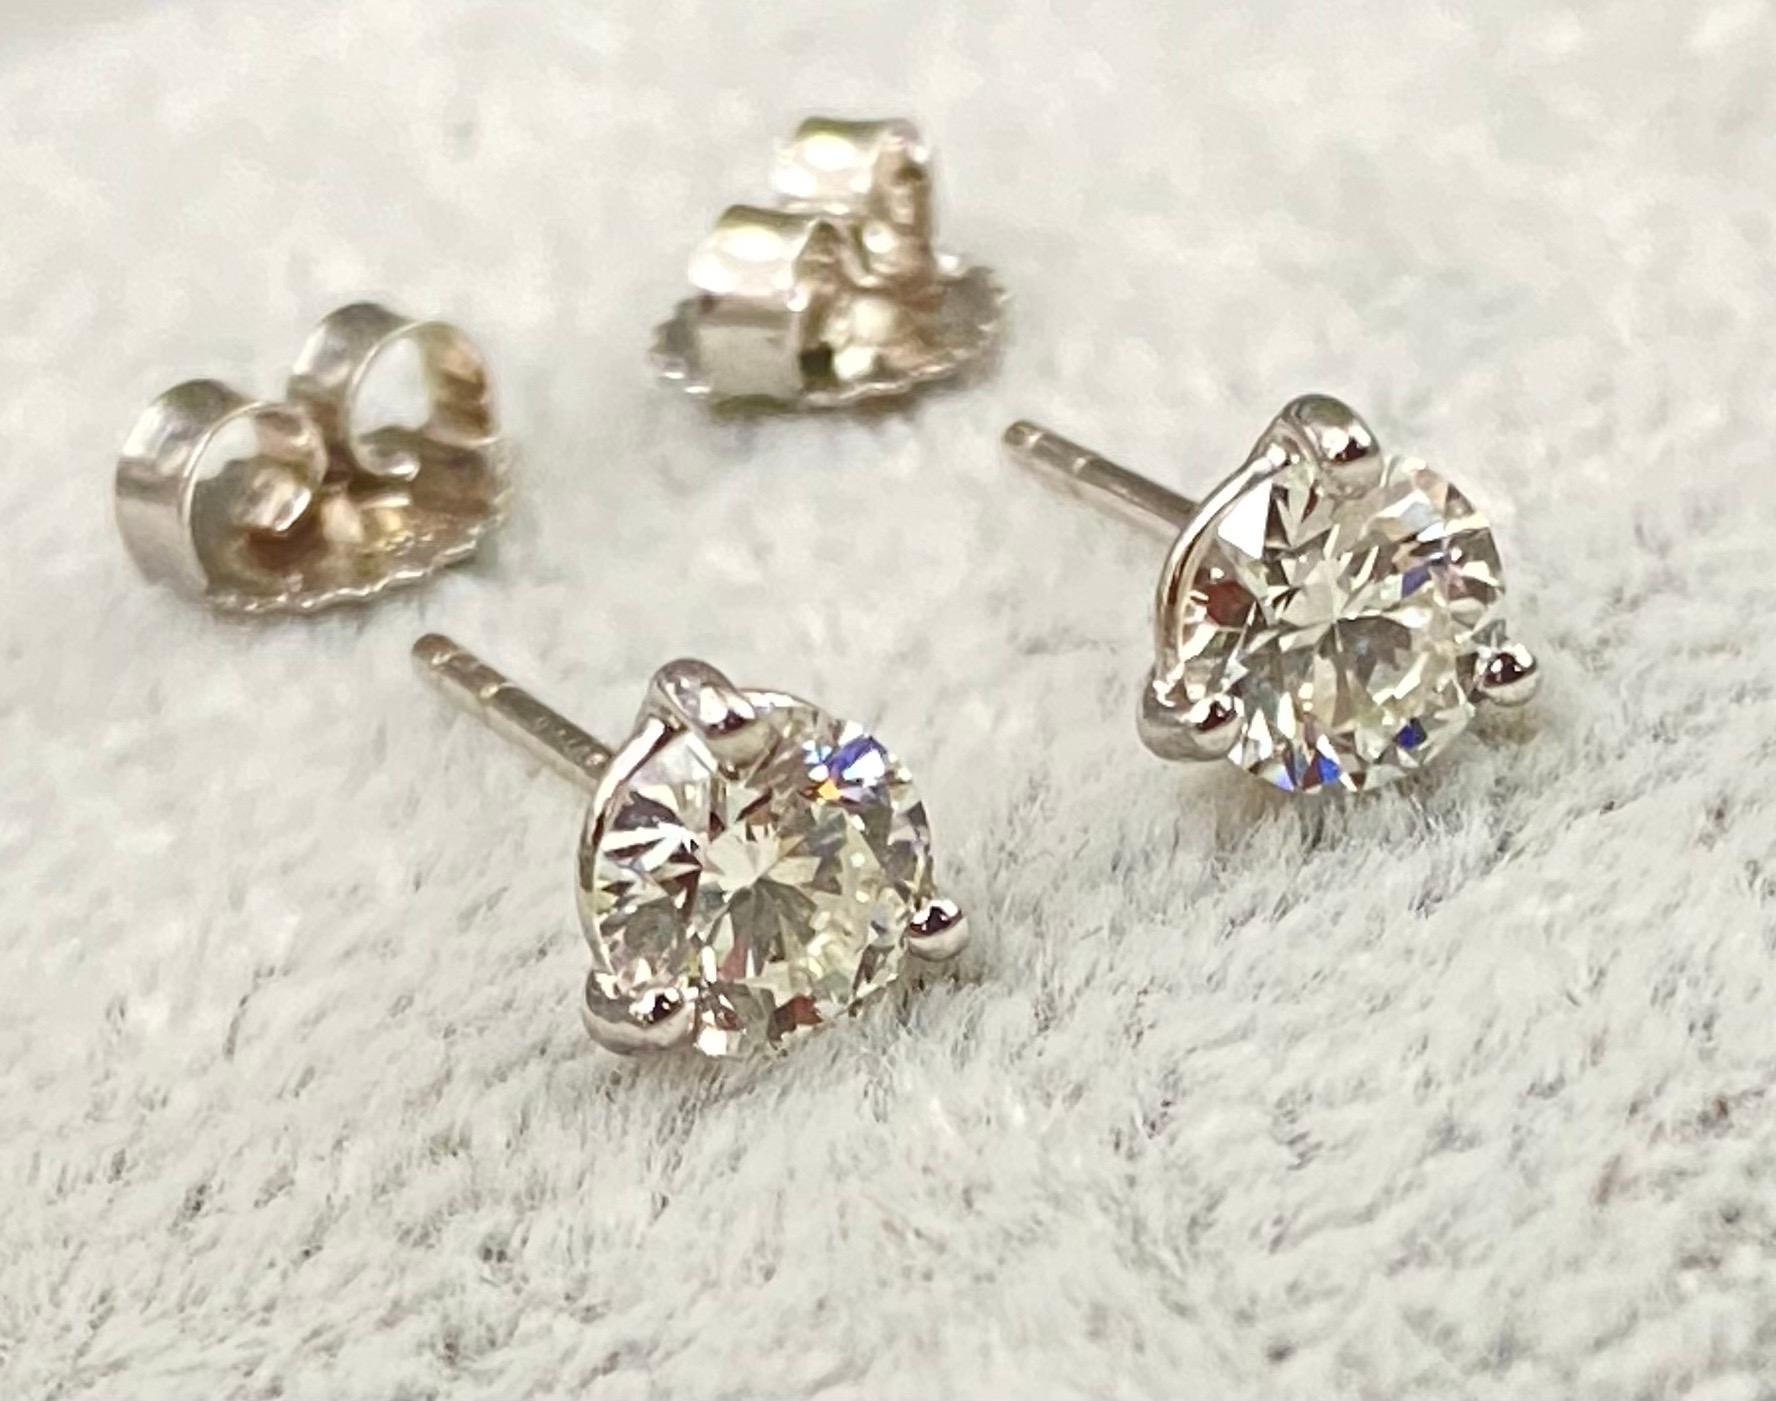 From the Stud Collection. The timeless elegance of a round brilliant-cut diamond stud shines in Kwiat's signature three-prong setting.
Diamonds, 1.32 tcw
Diamond color: G/H
Diamond clarity: VS/SI (Very Clean)
Platinum Stem (marked Kwiat)
18K white